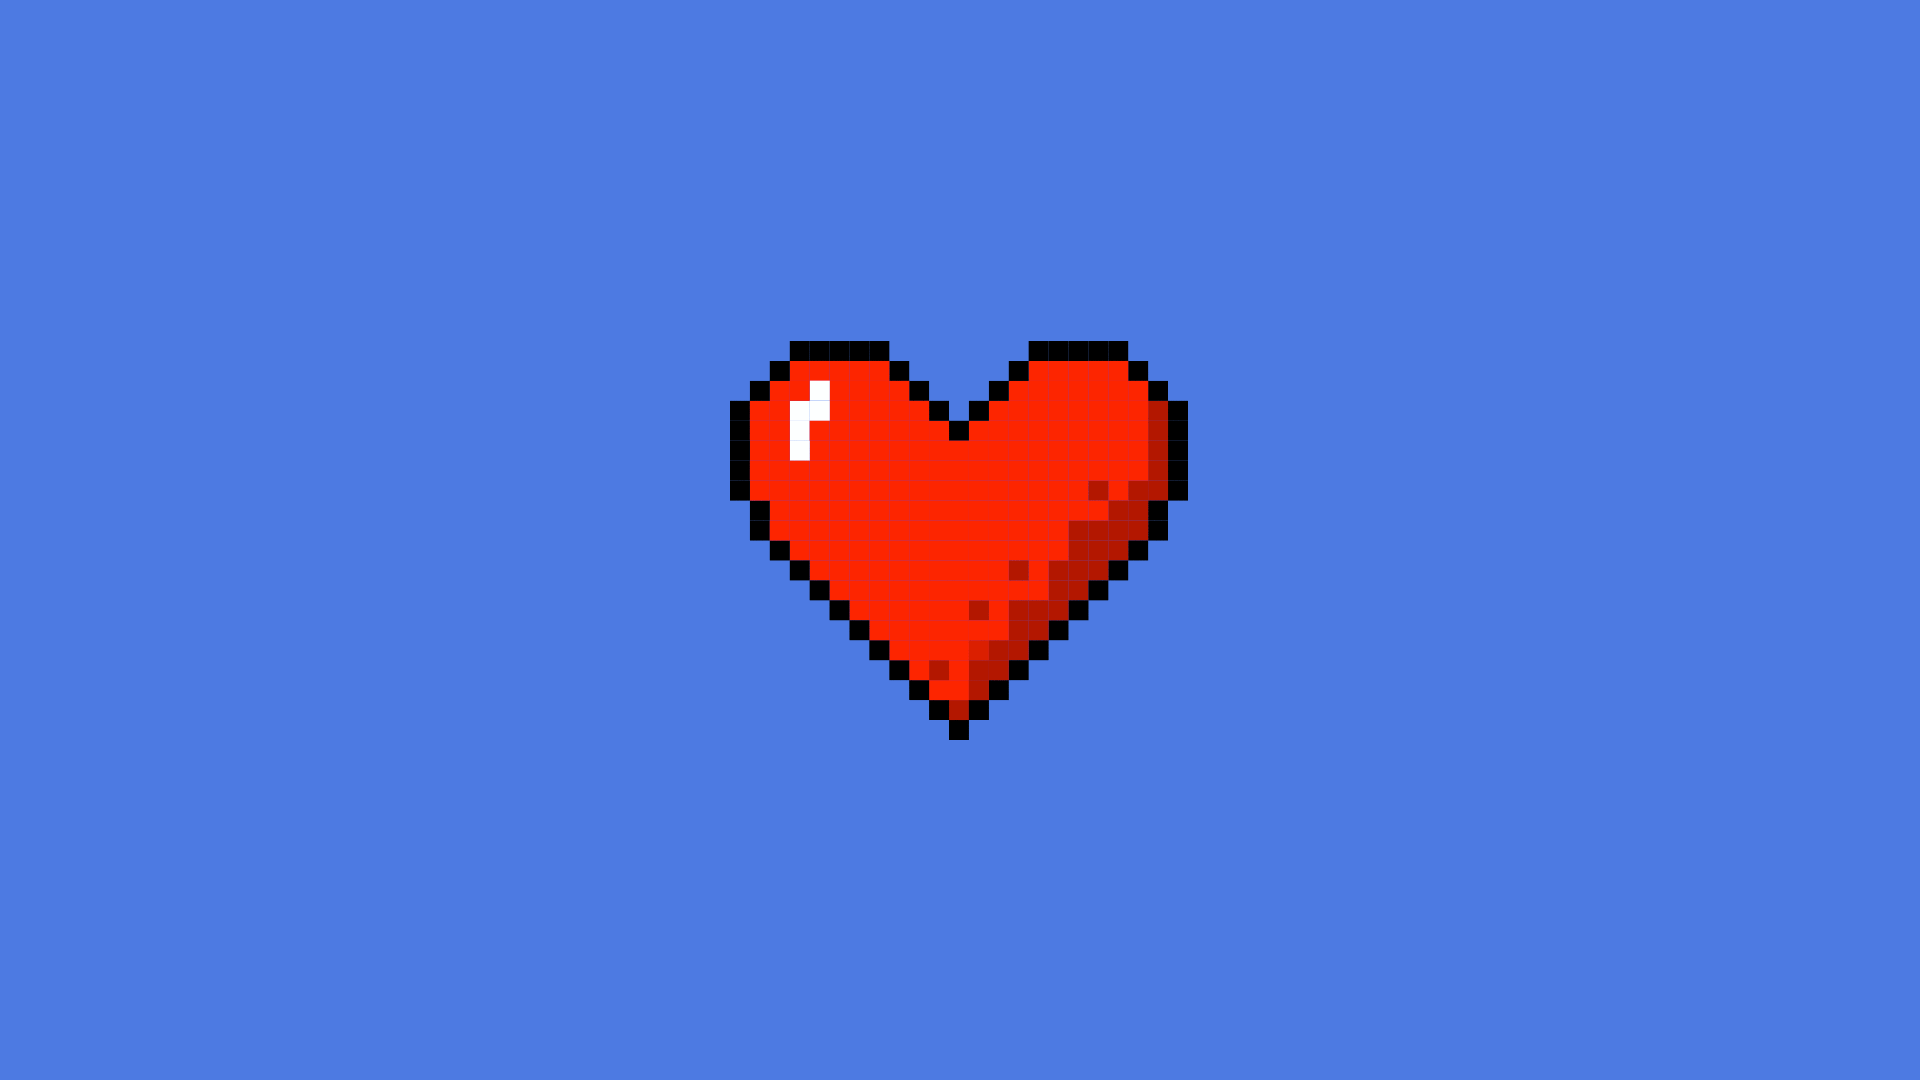 Animated illustration of a pixelated heart breaking apart.